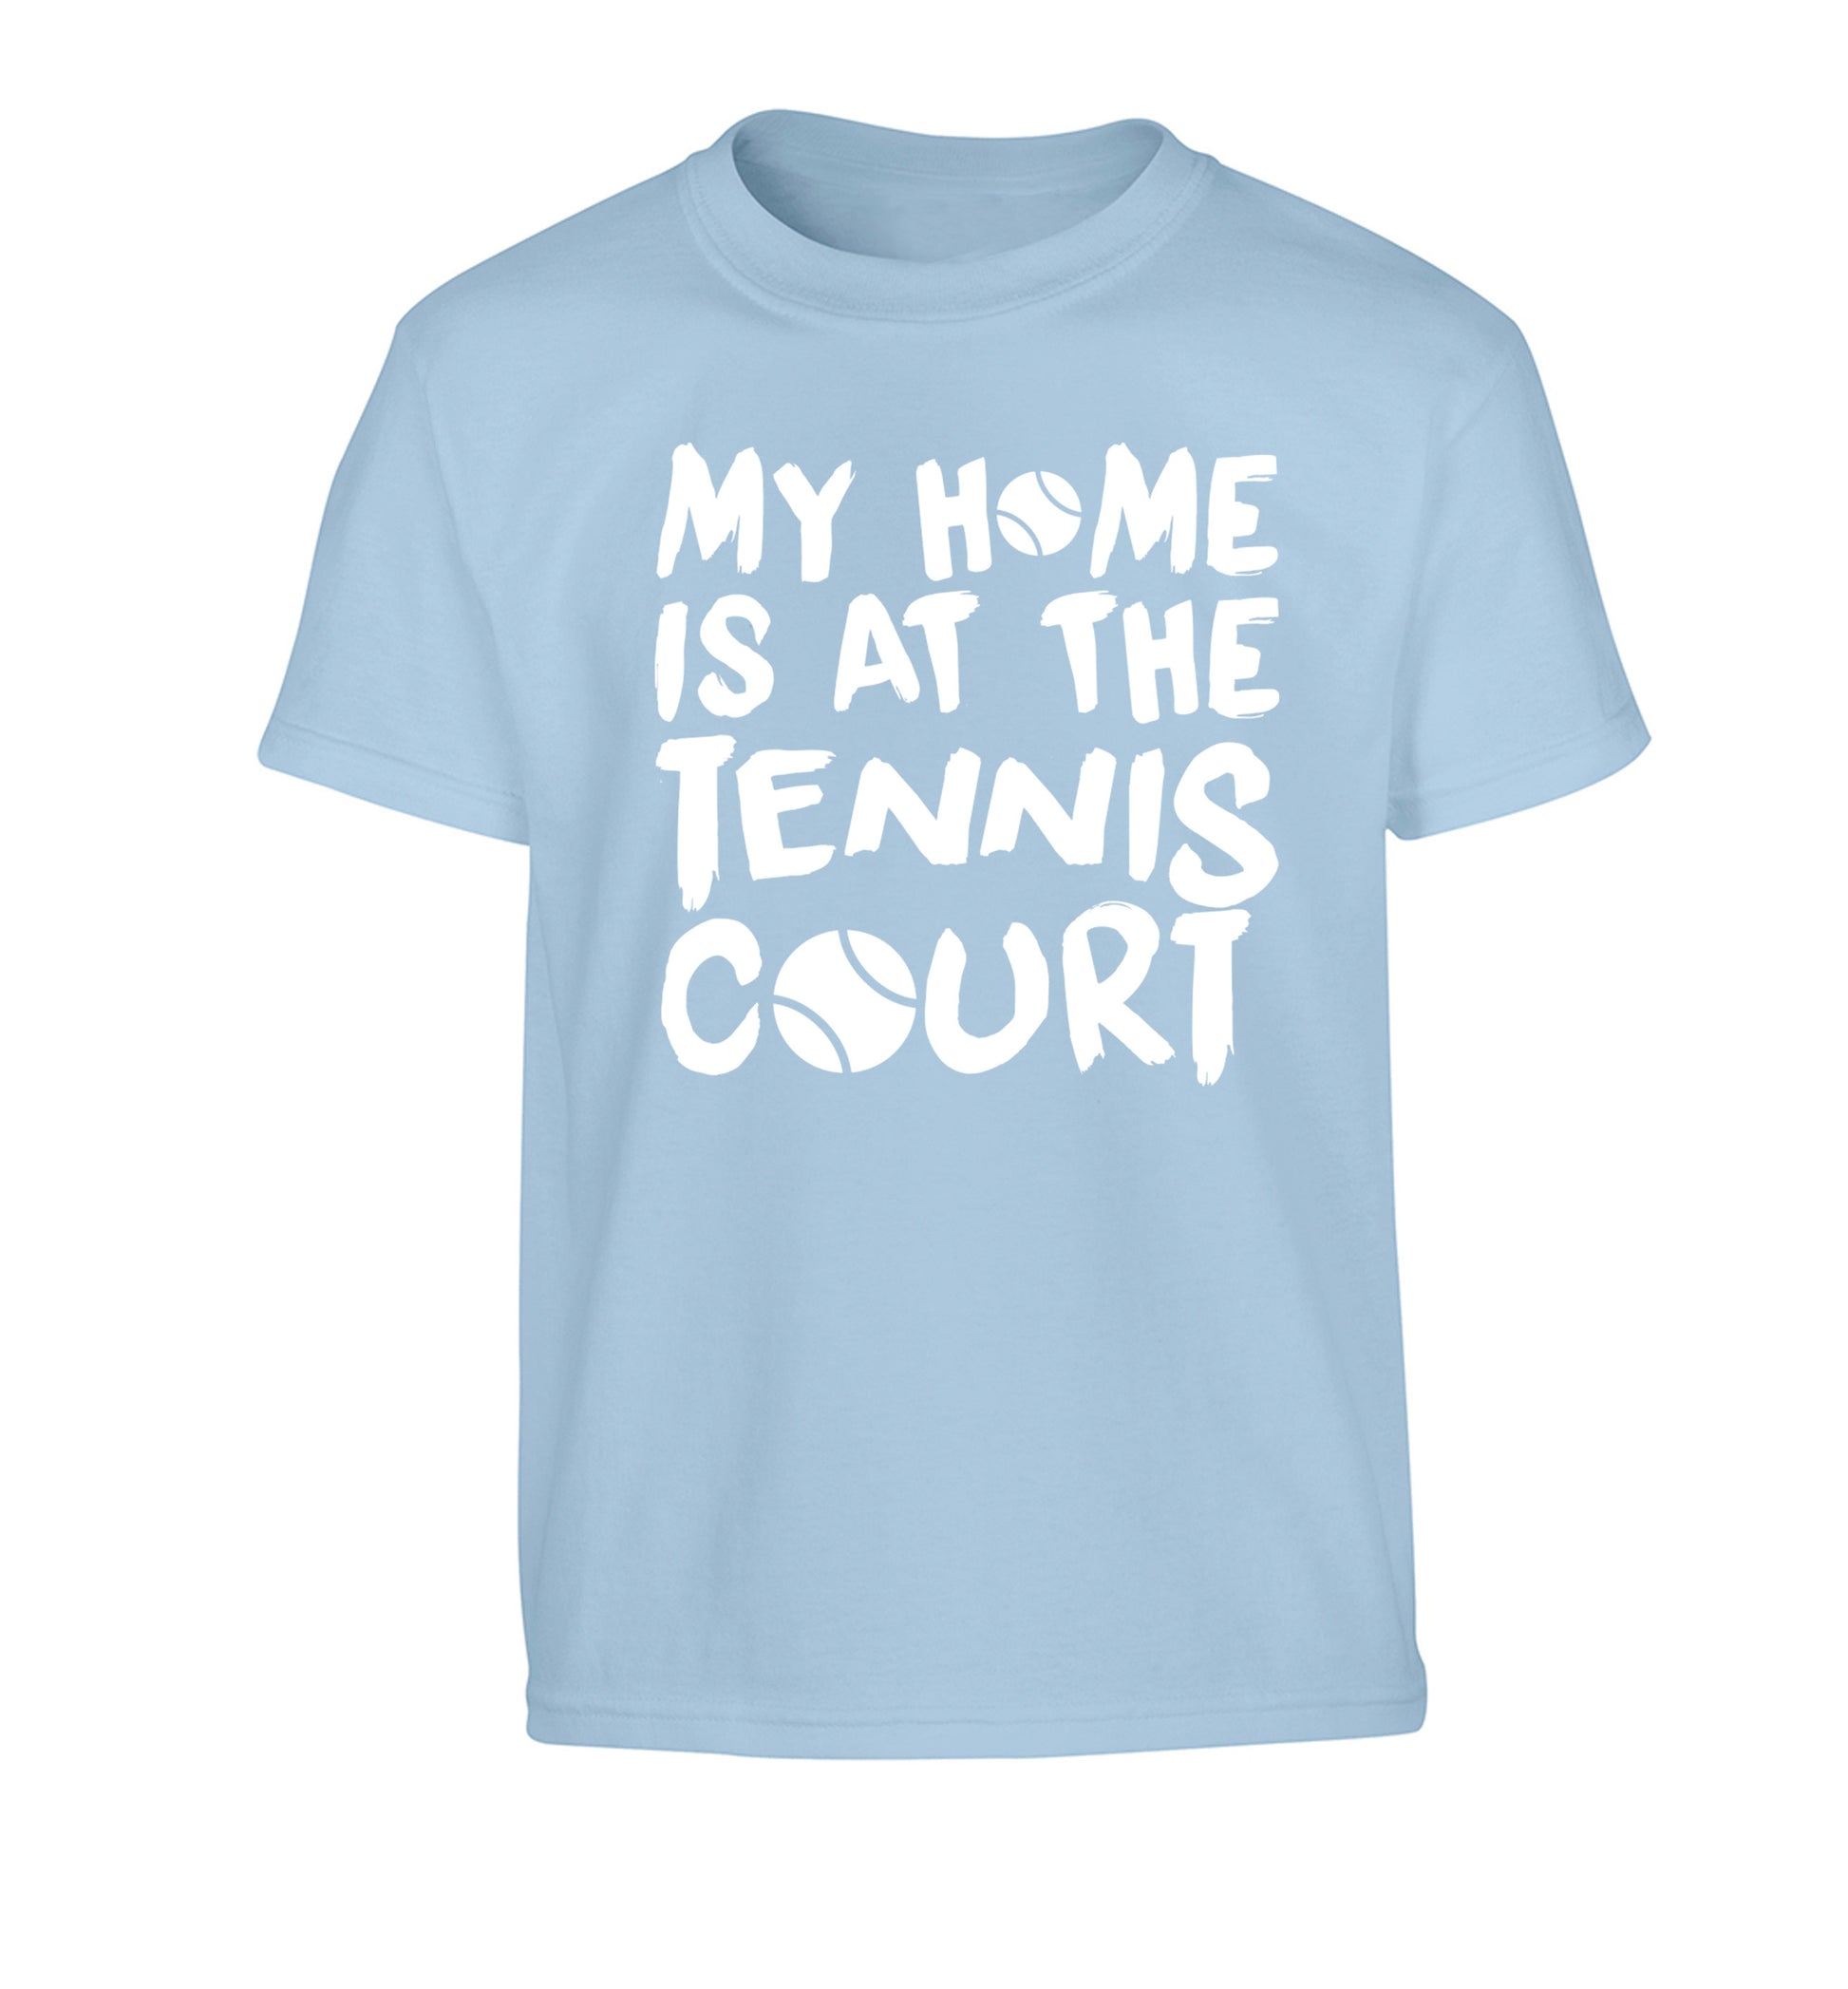 My home is at the tennis court Children's light blue Tshirt 12-14 Years